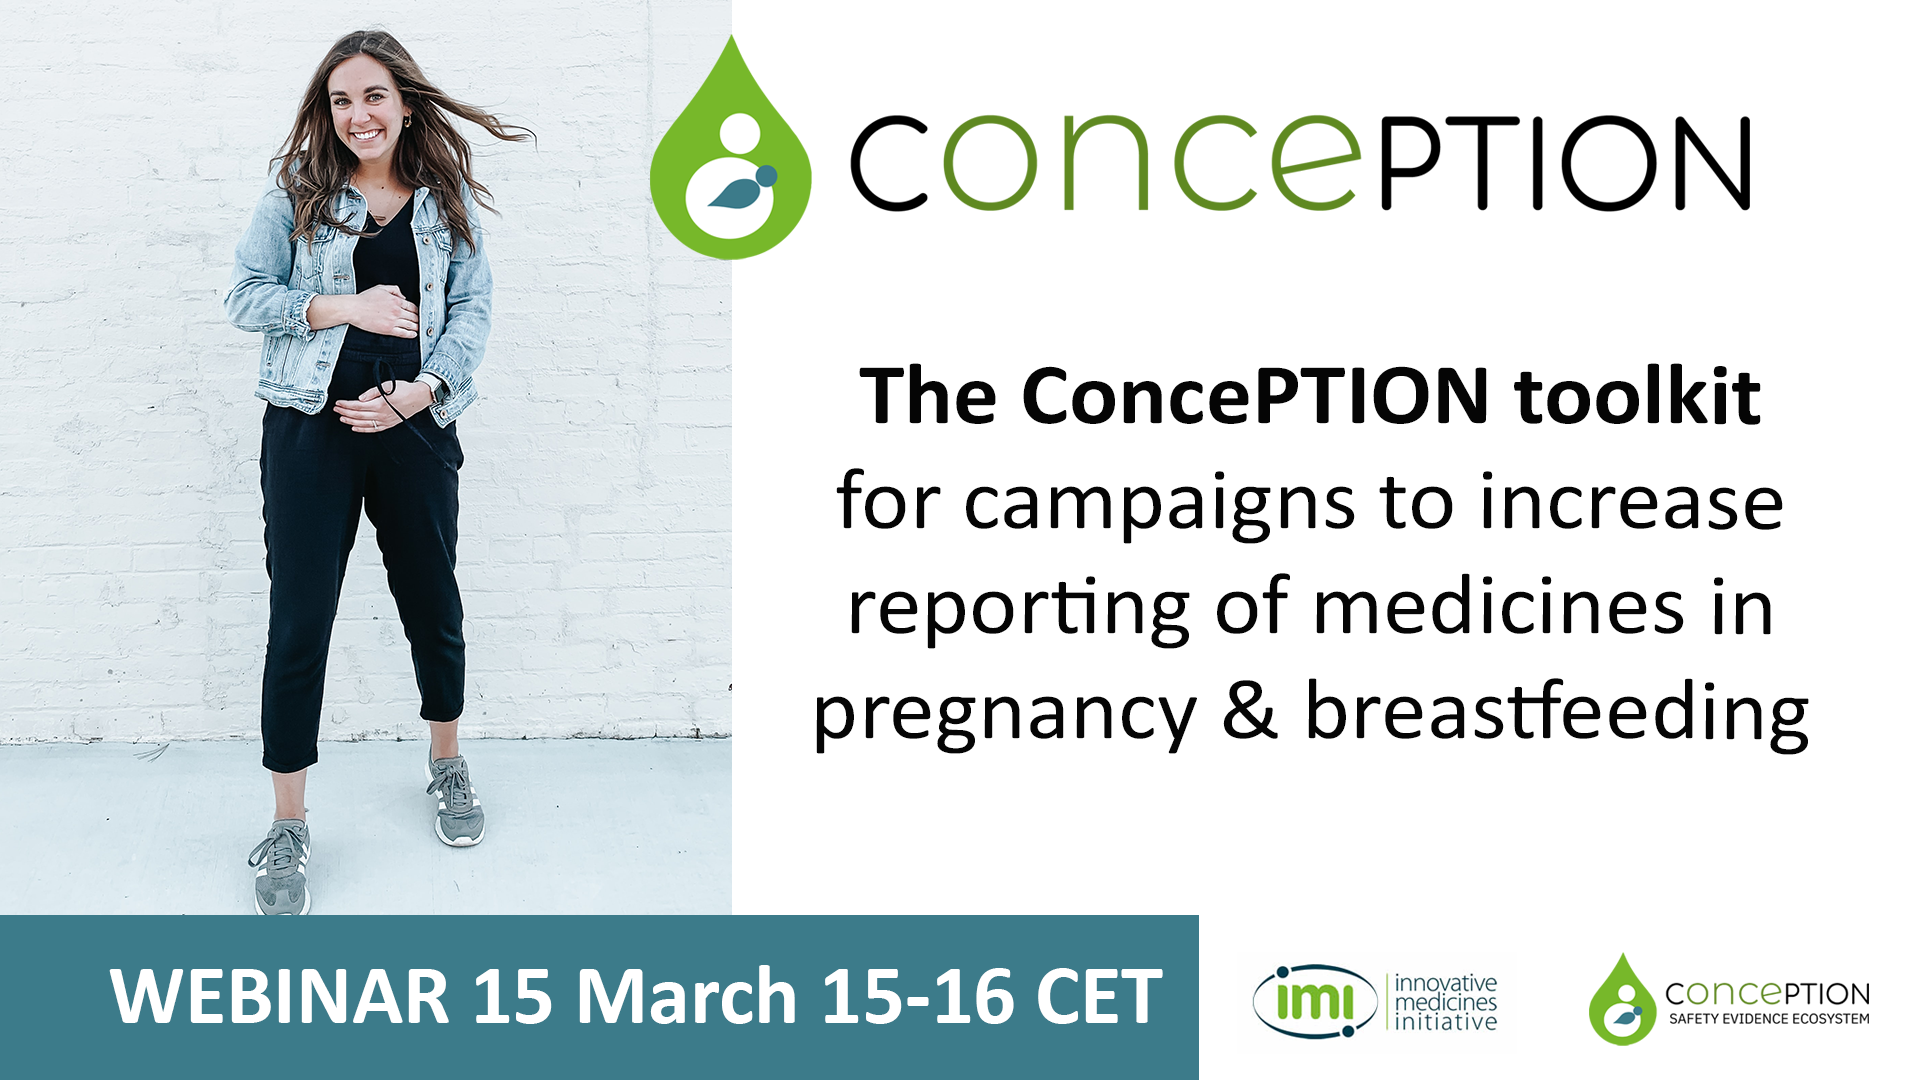 The ConcePTION toolit for campaigns increase womens reporting of medicines in breastfeeding and pregnancy 15 Mach 2023